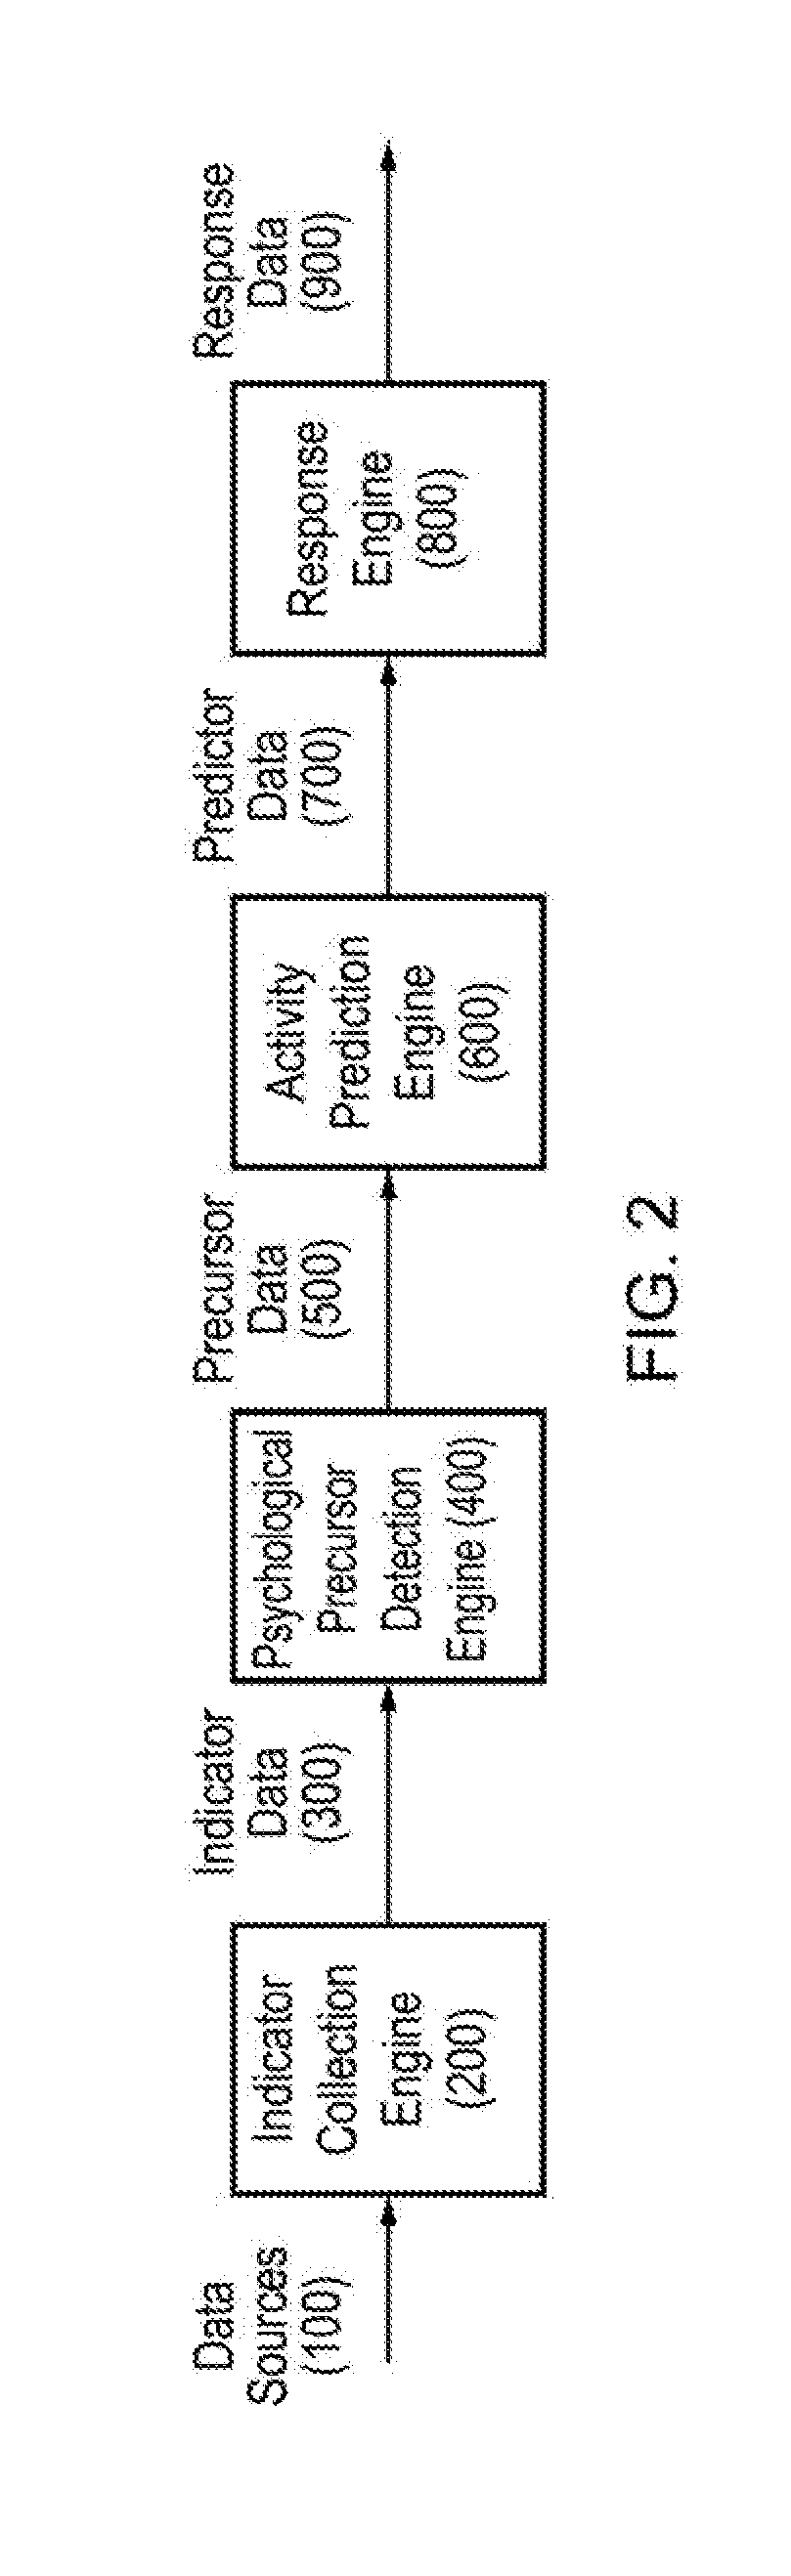 System for and method for detection of insider threats